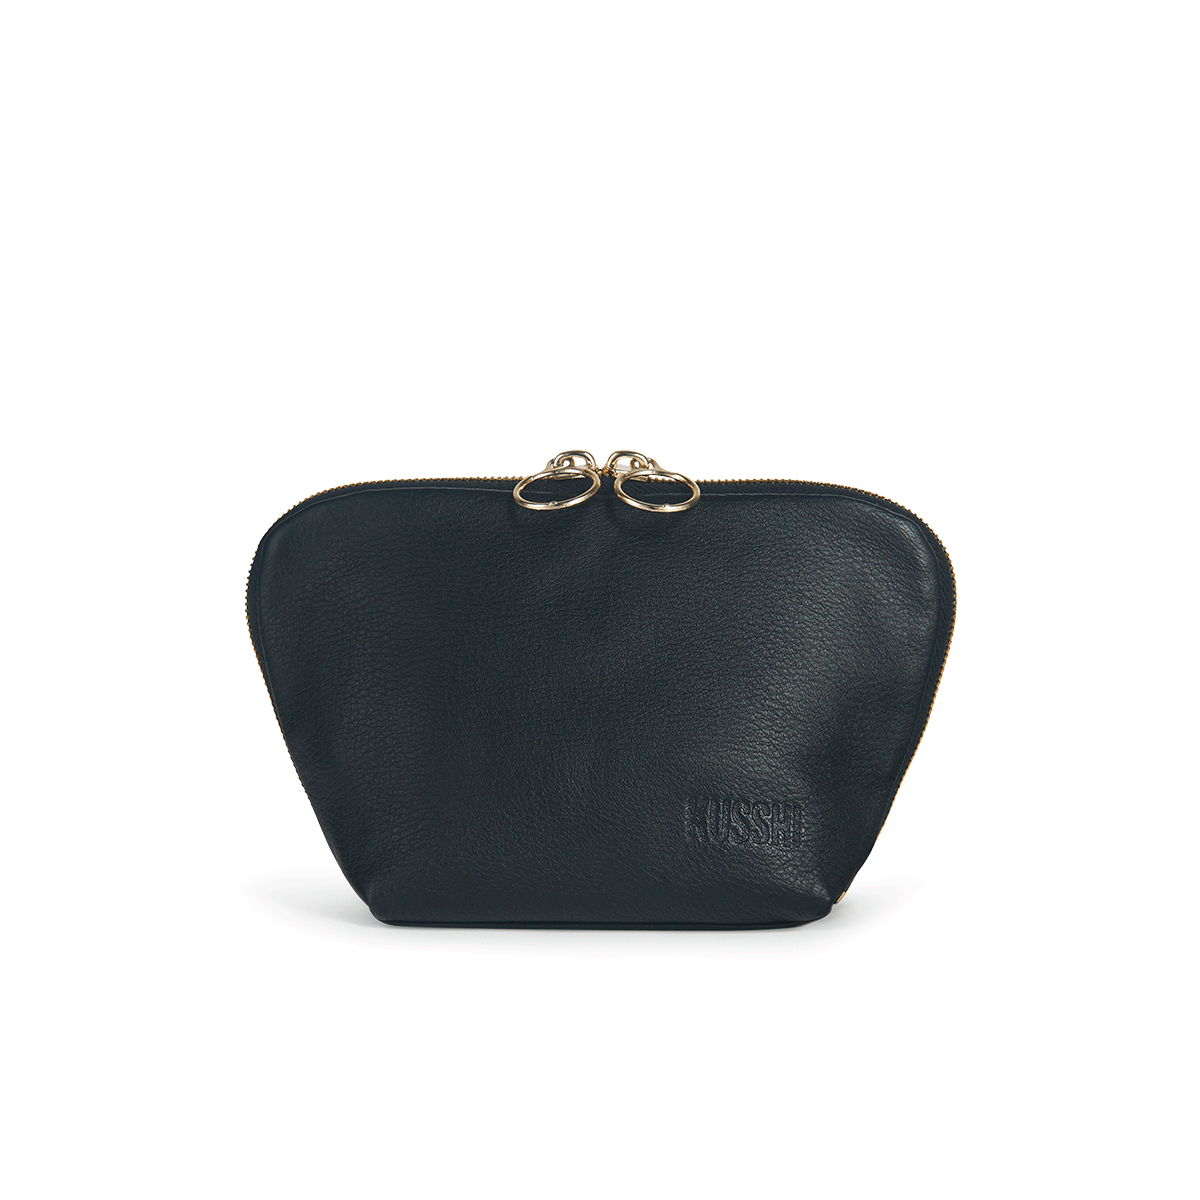 color: Everyday+Luxurious Black Leather with Emerald Green Interior; alt: Everyday Small Makeup Bag | KUSSHI